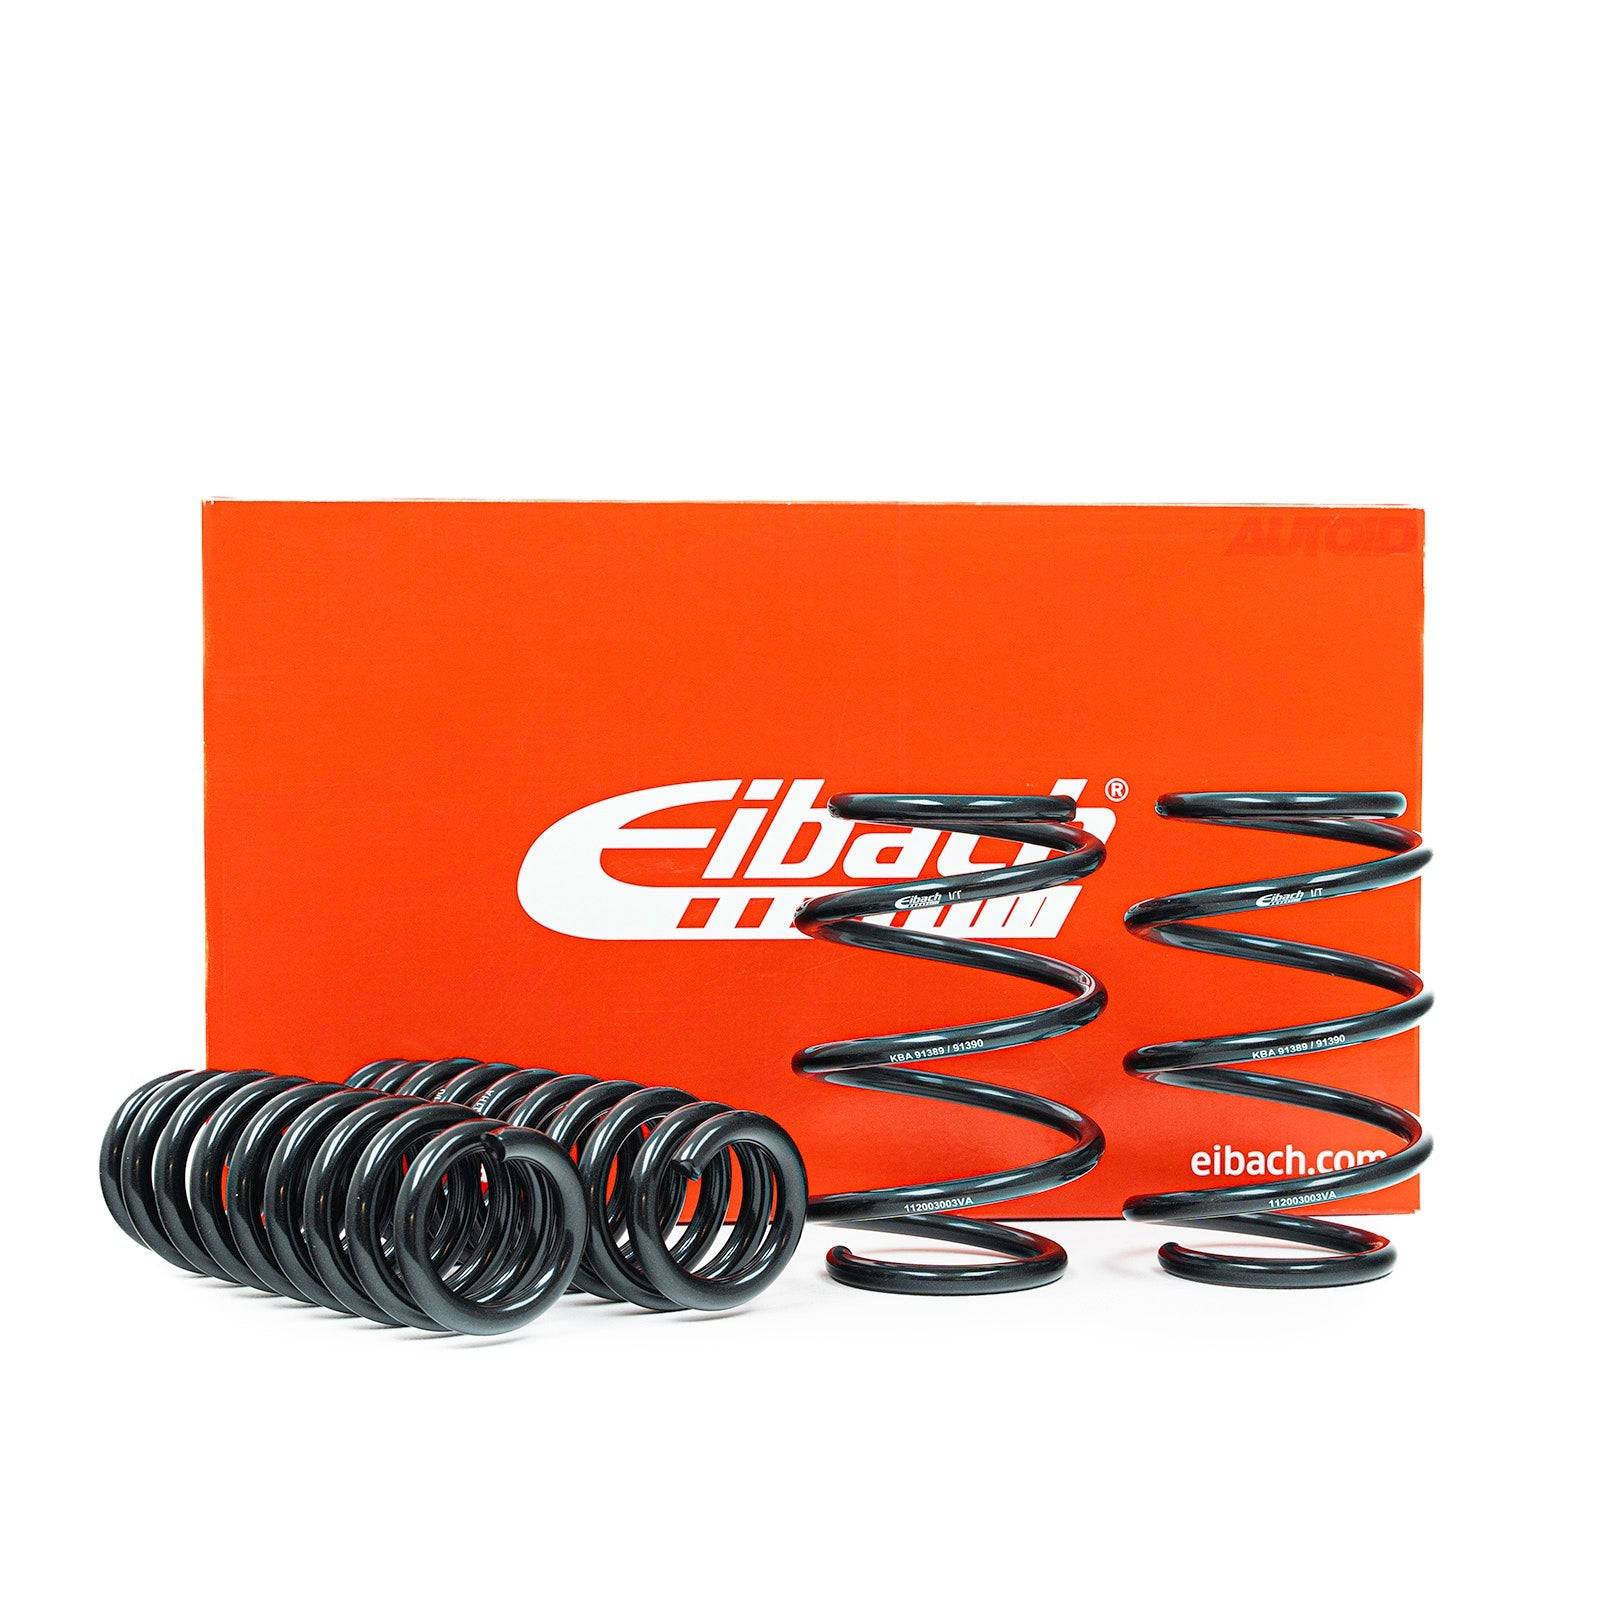 Mercedes-Benz A35, A45 AMG & A45 AMG S 4-Matic Lowering Suspension Springs by Eibach (2018+), Lowering Springs, Eibach - AUTOID | Premium Automotive Accessories